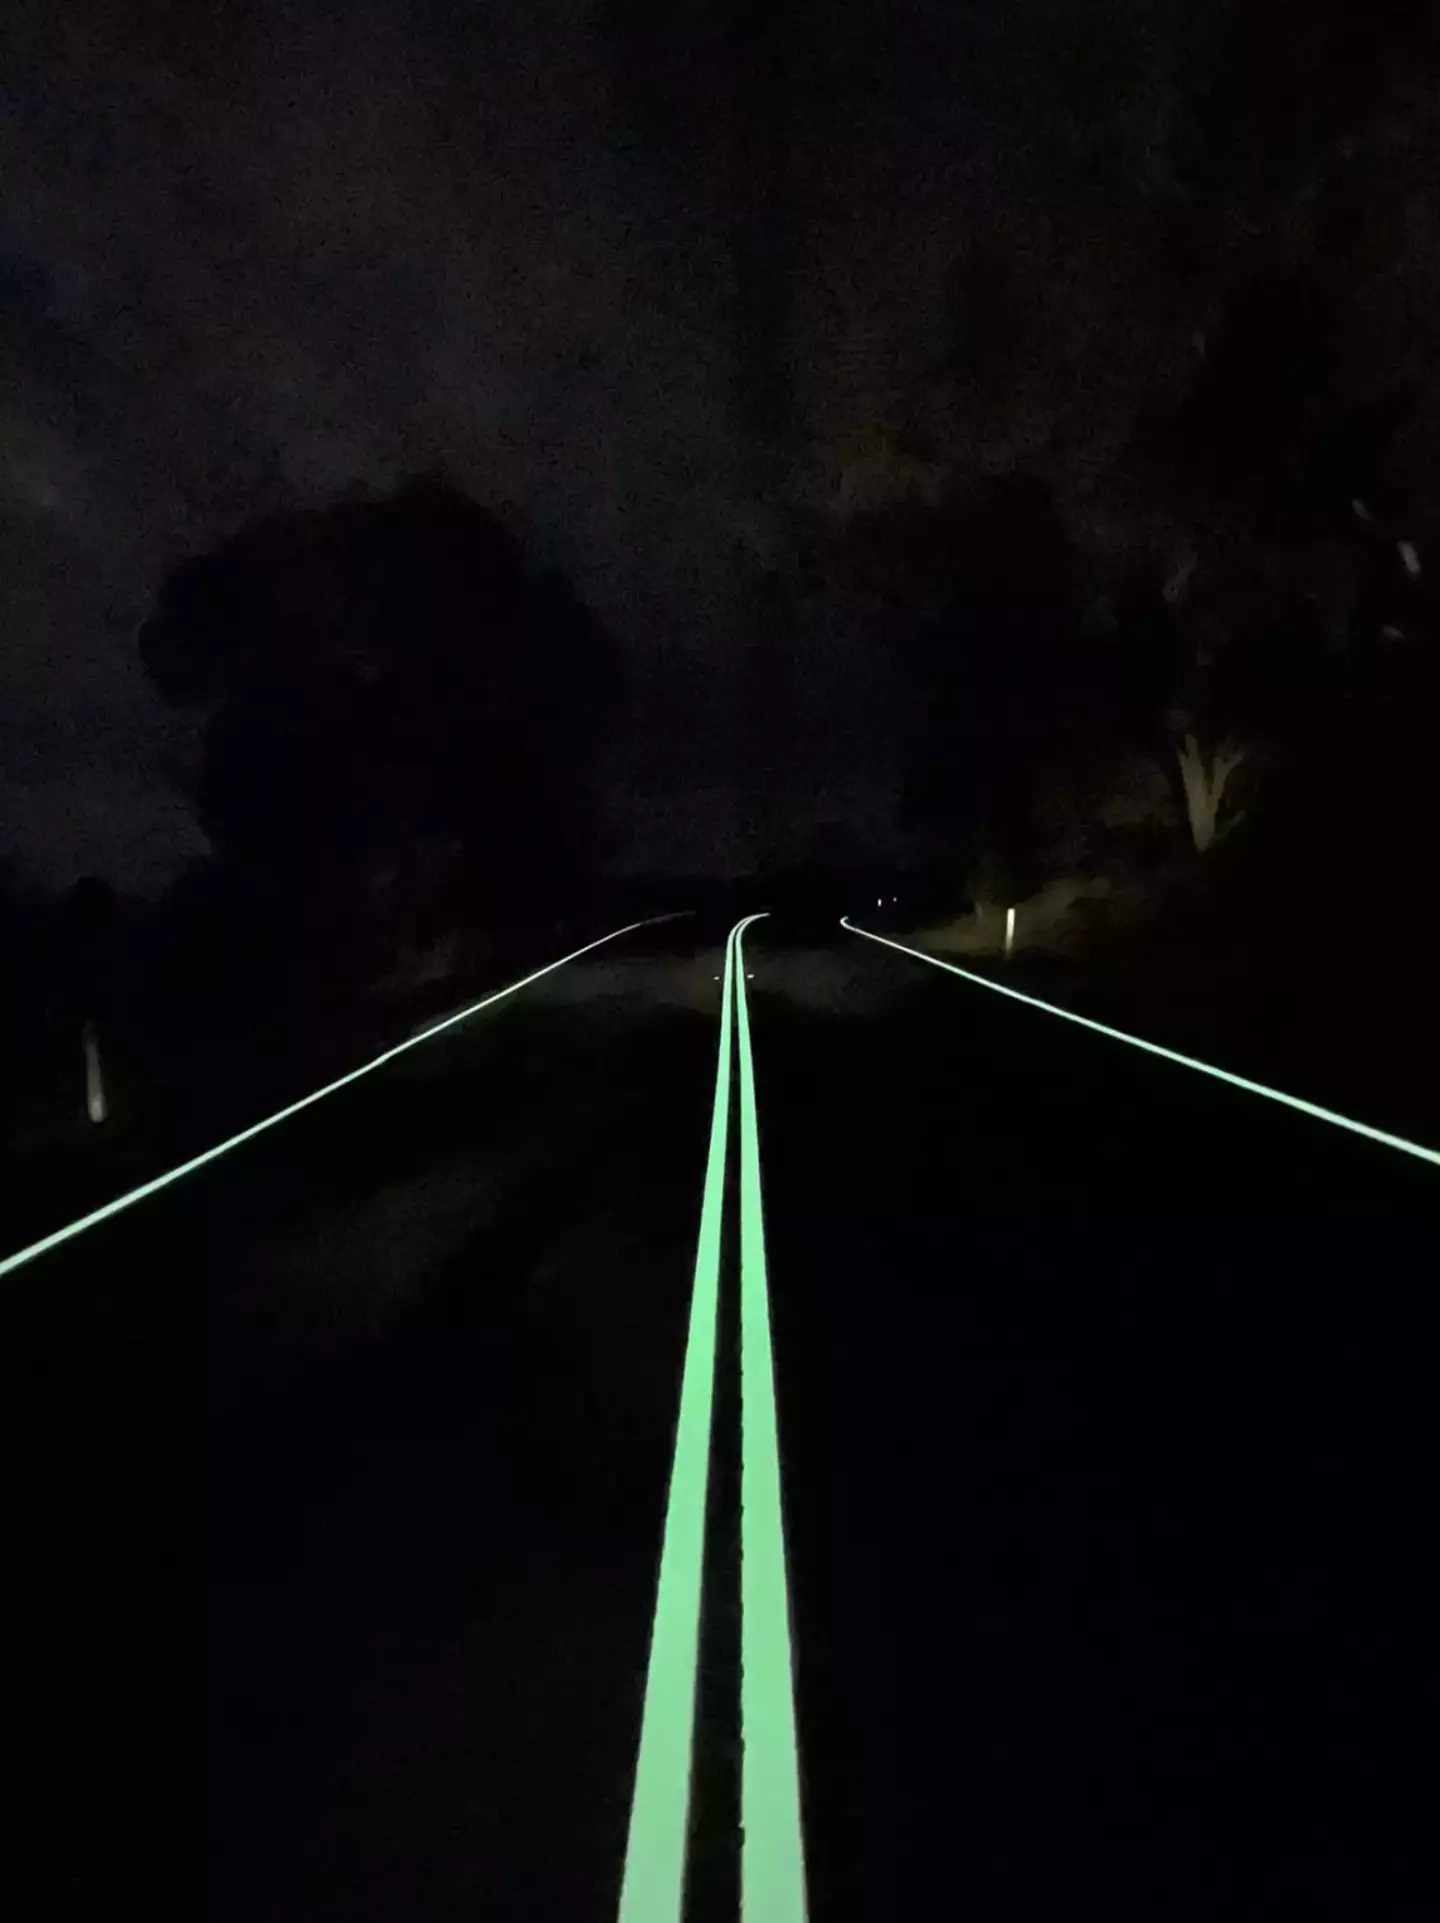 The lines light up at night to help drivers.